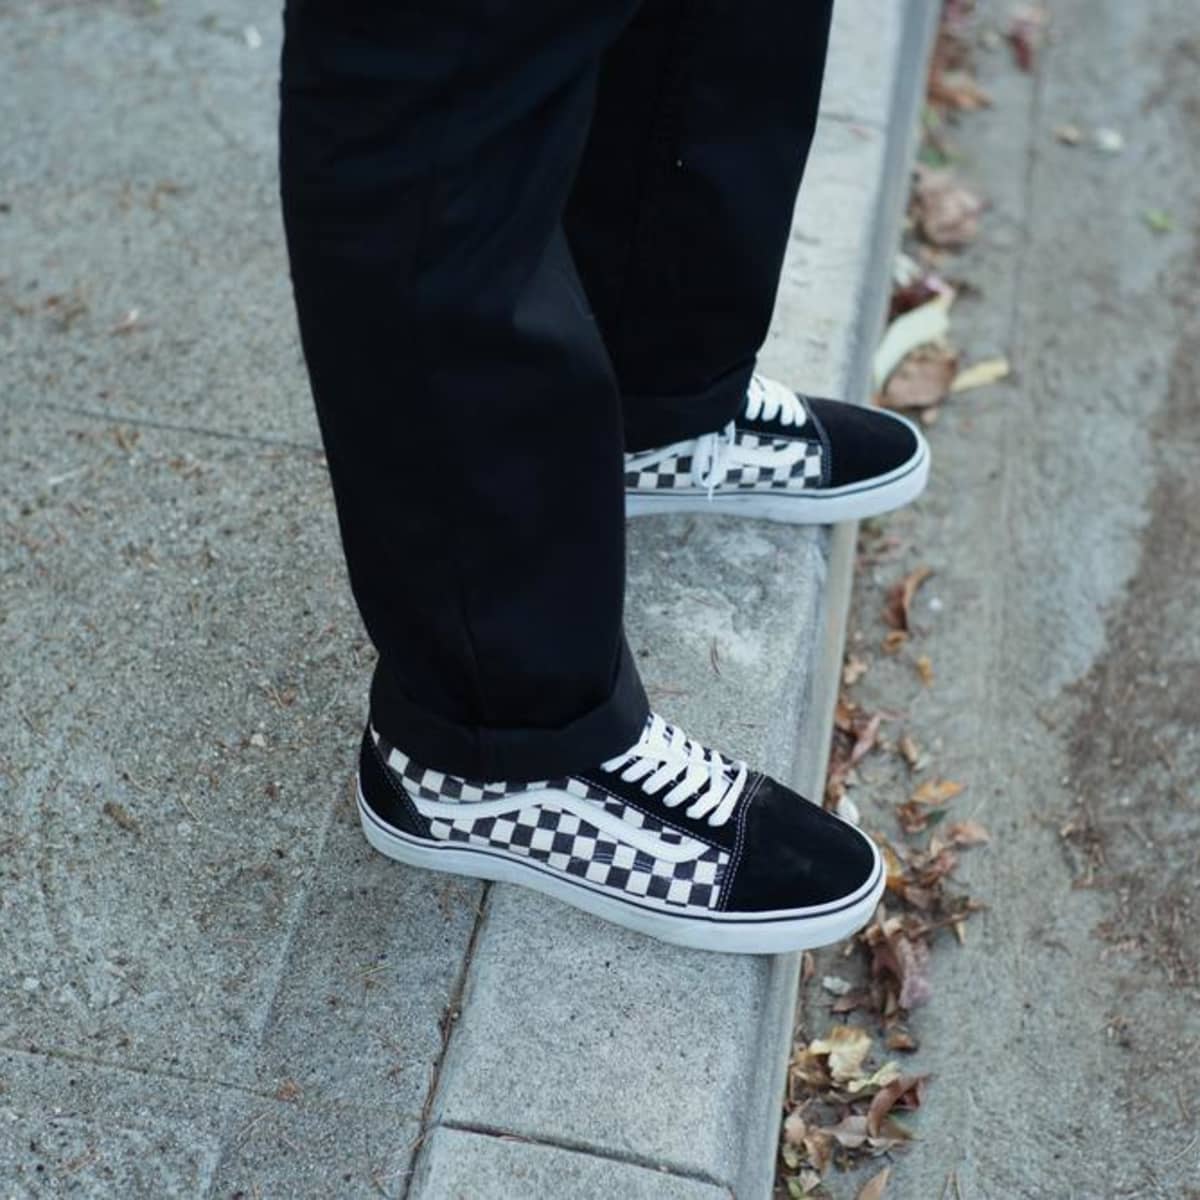 Vans Pays Homage to Iconic Motif with Checkerboard Collection Surfer